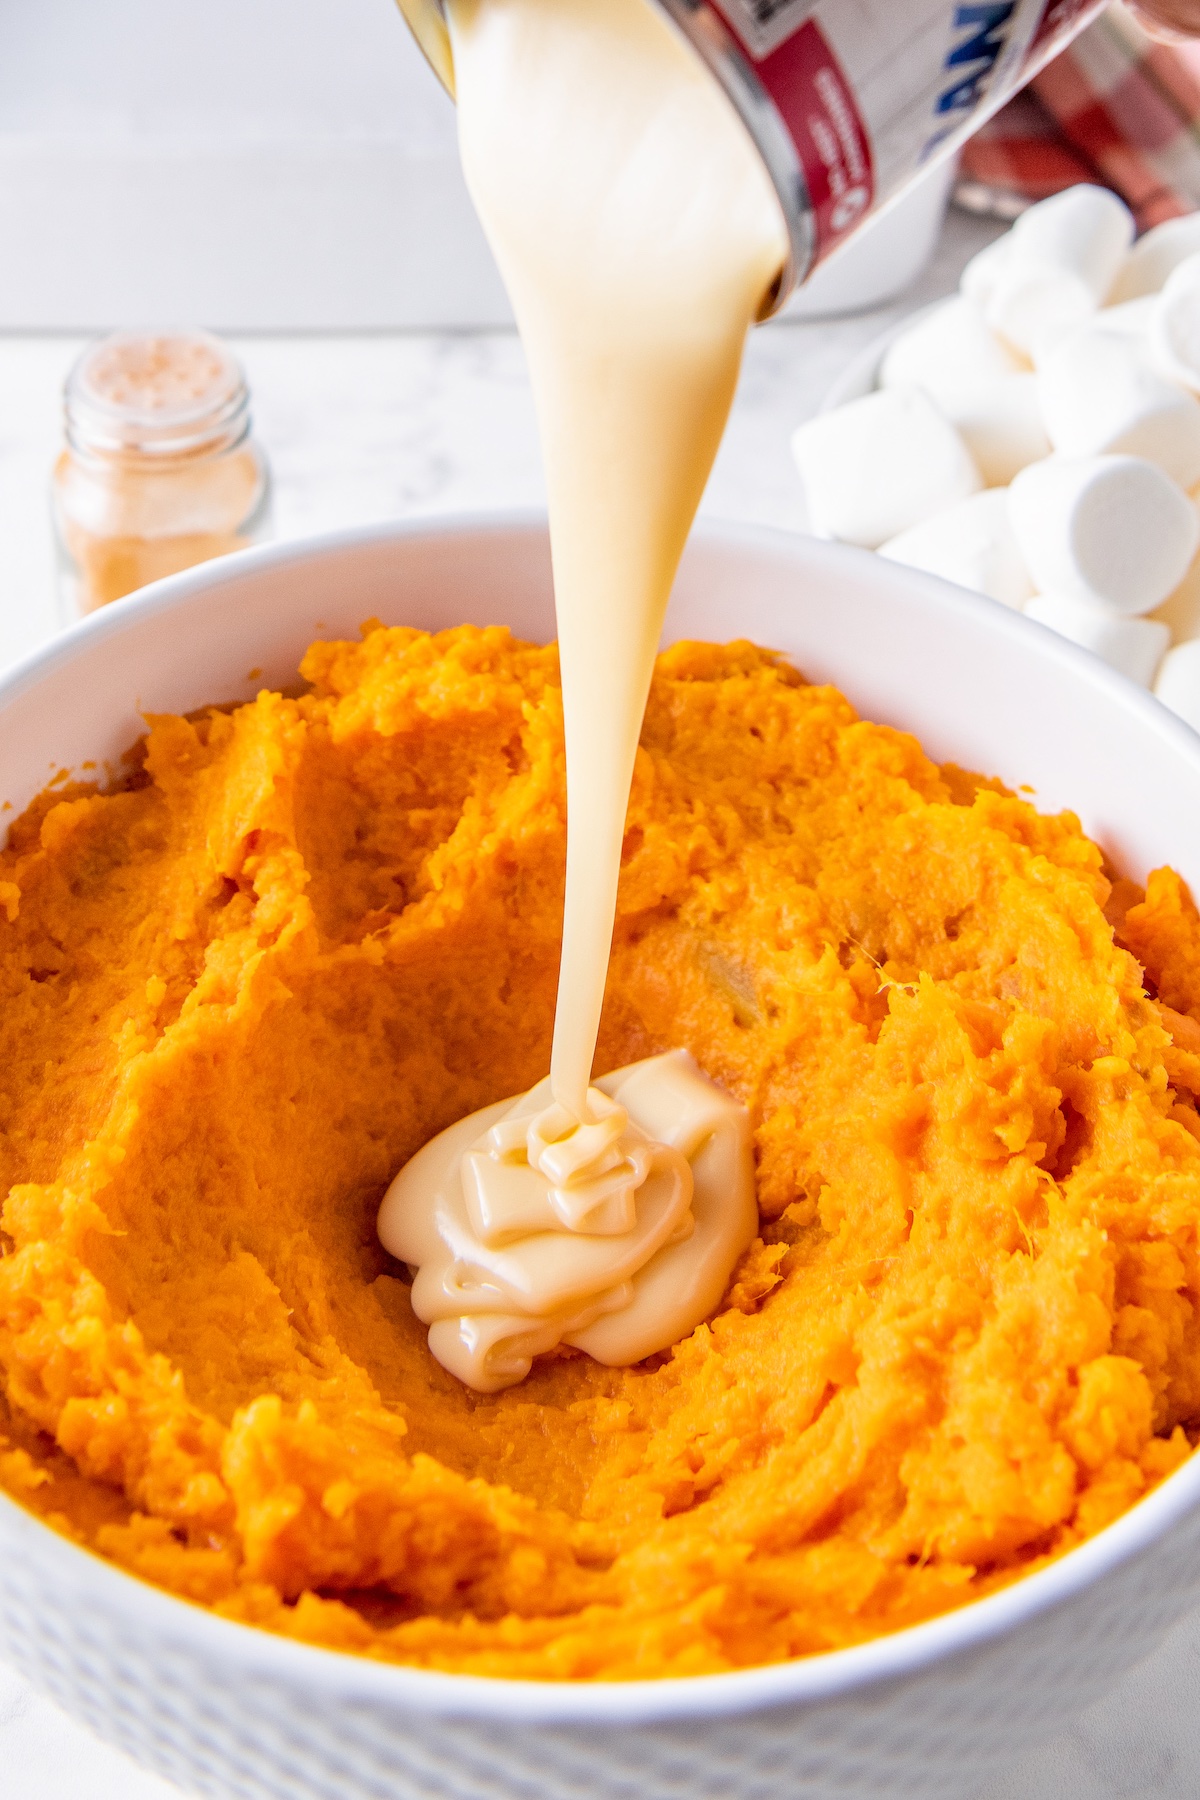 Sweetened condensed milk being poured into a bowl of mashed sweet potatoes.